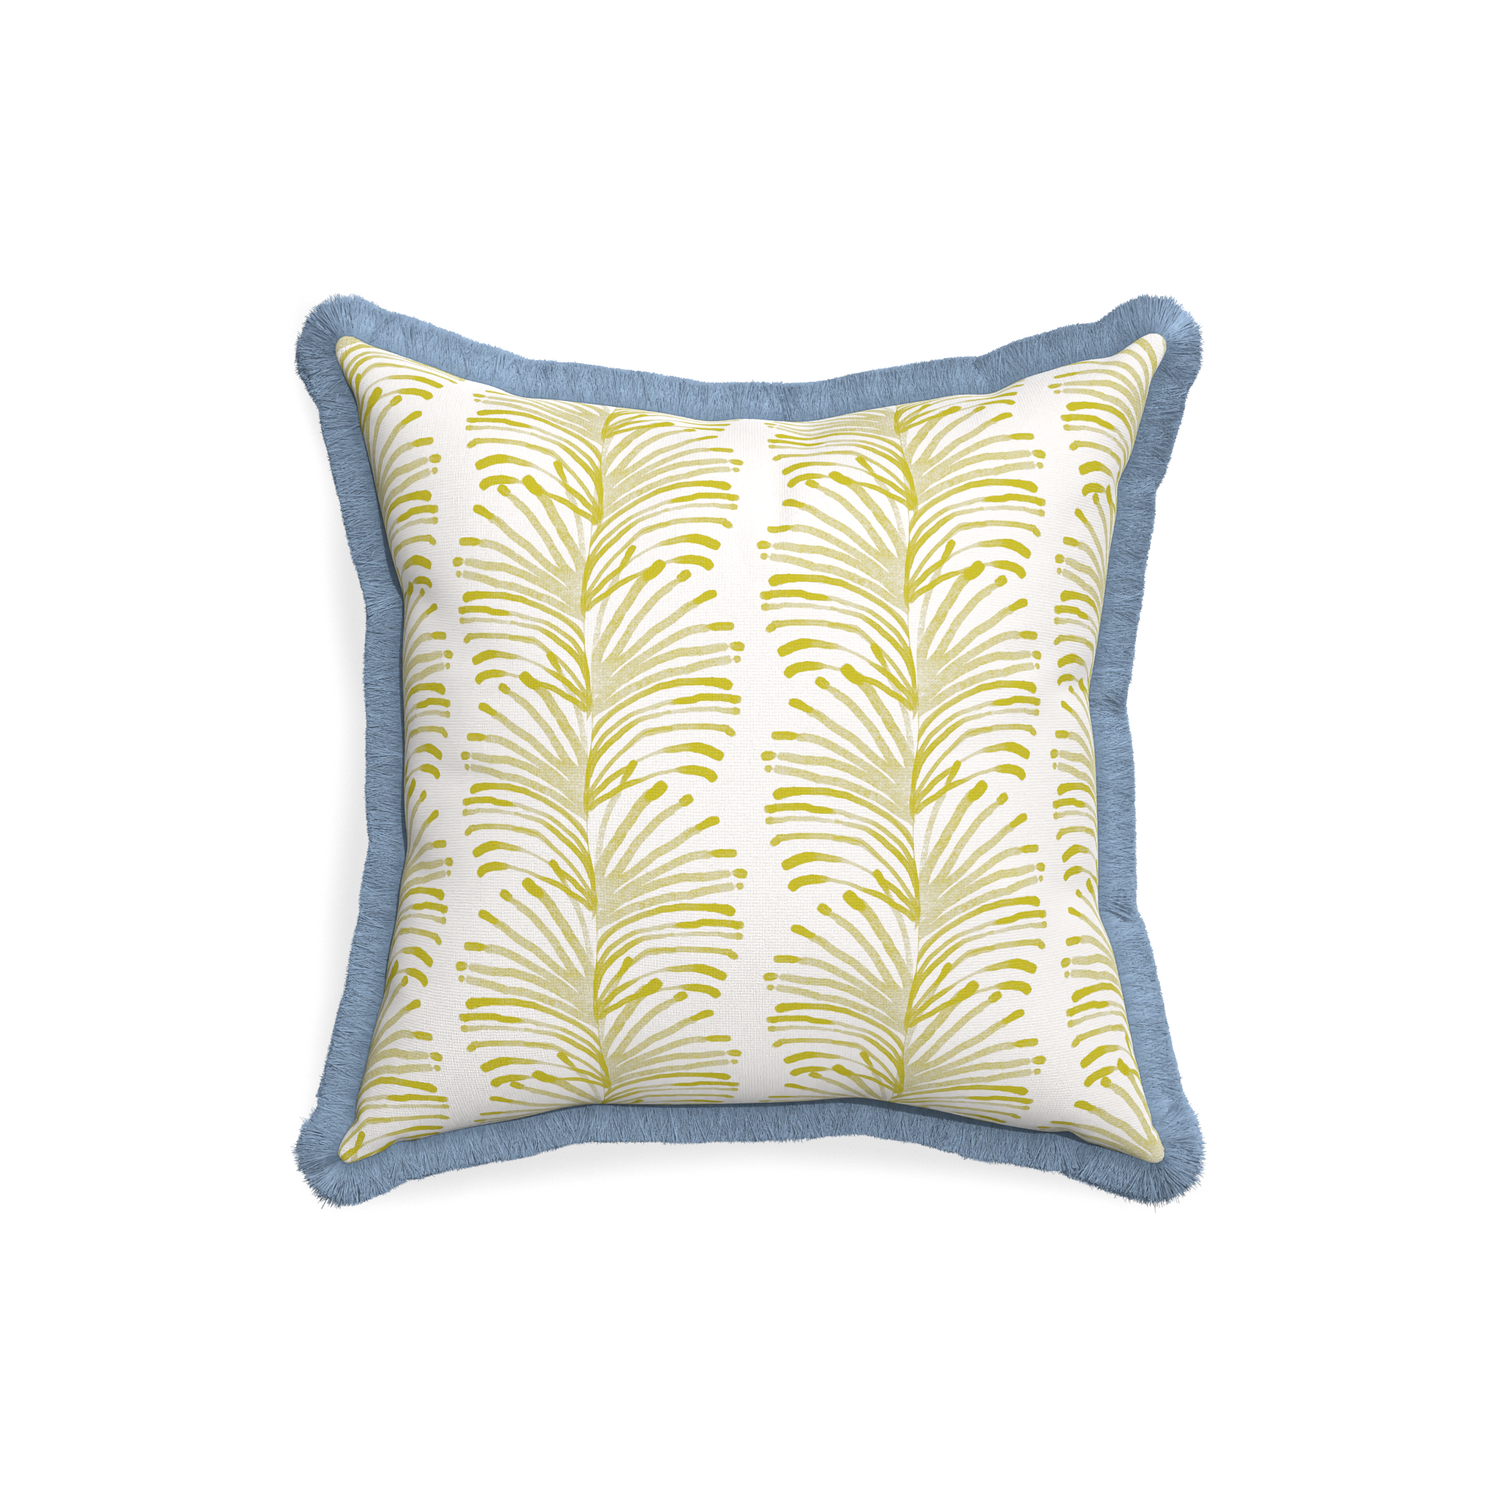 18-square emma chartreuse custom pillow with sky fringe on white background